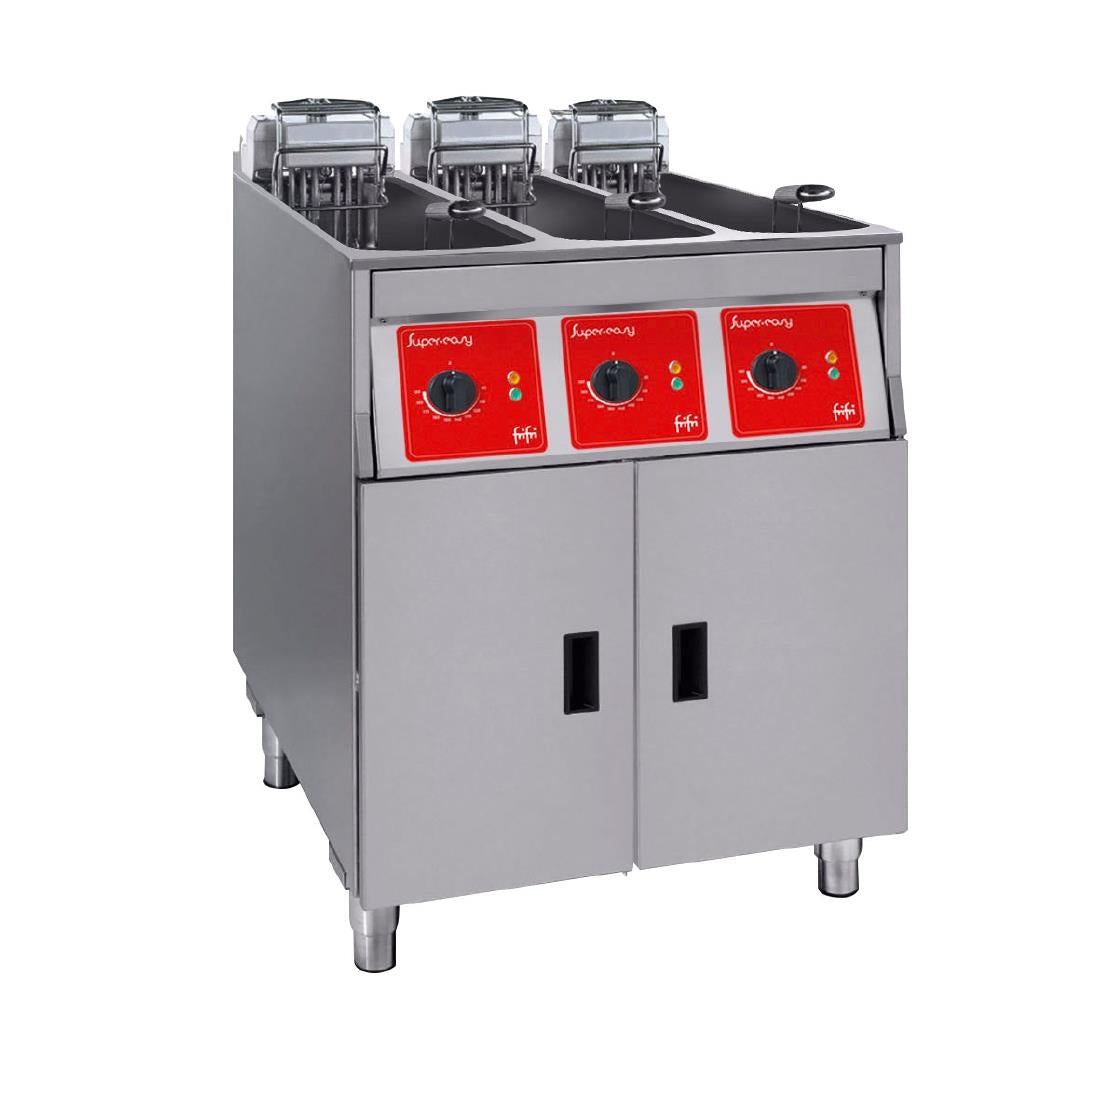 HS077-3PH FriFri Super Easy 633 Electric Free-standing Fryer Triple Tank Triple Basket without Filtration 3x7.5kW Three Phase